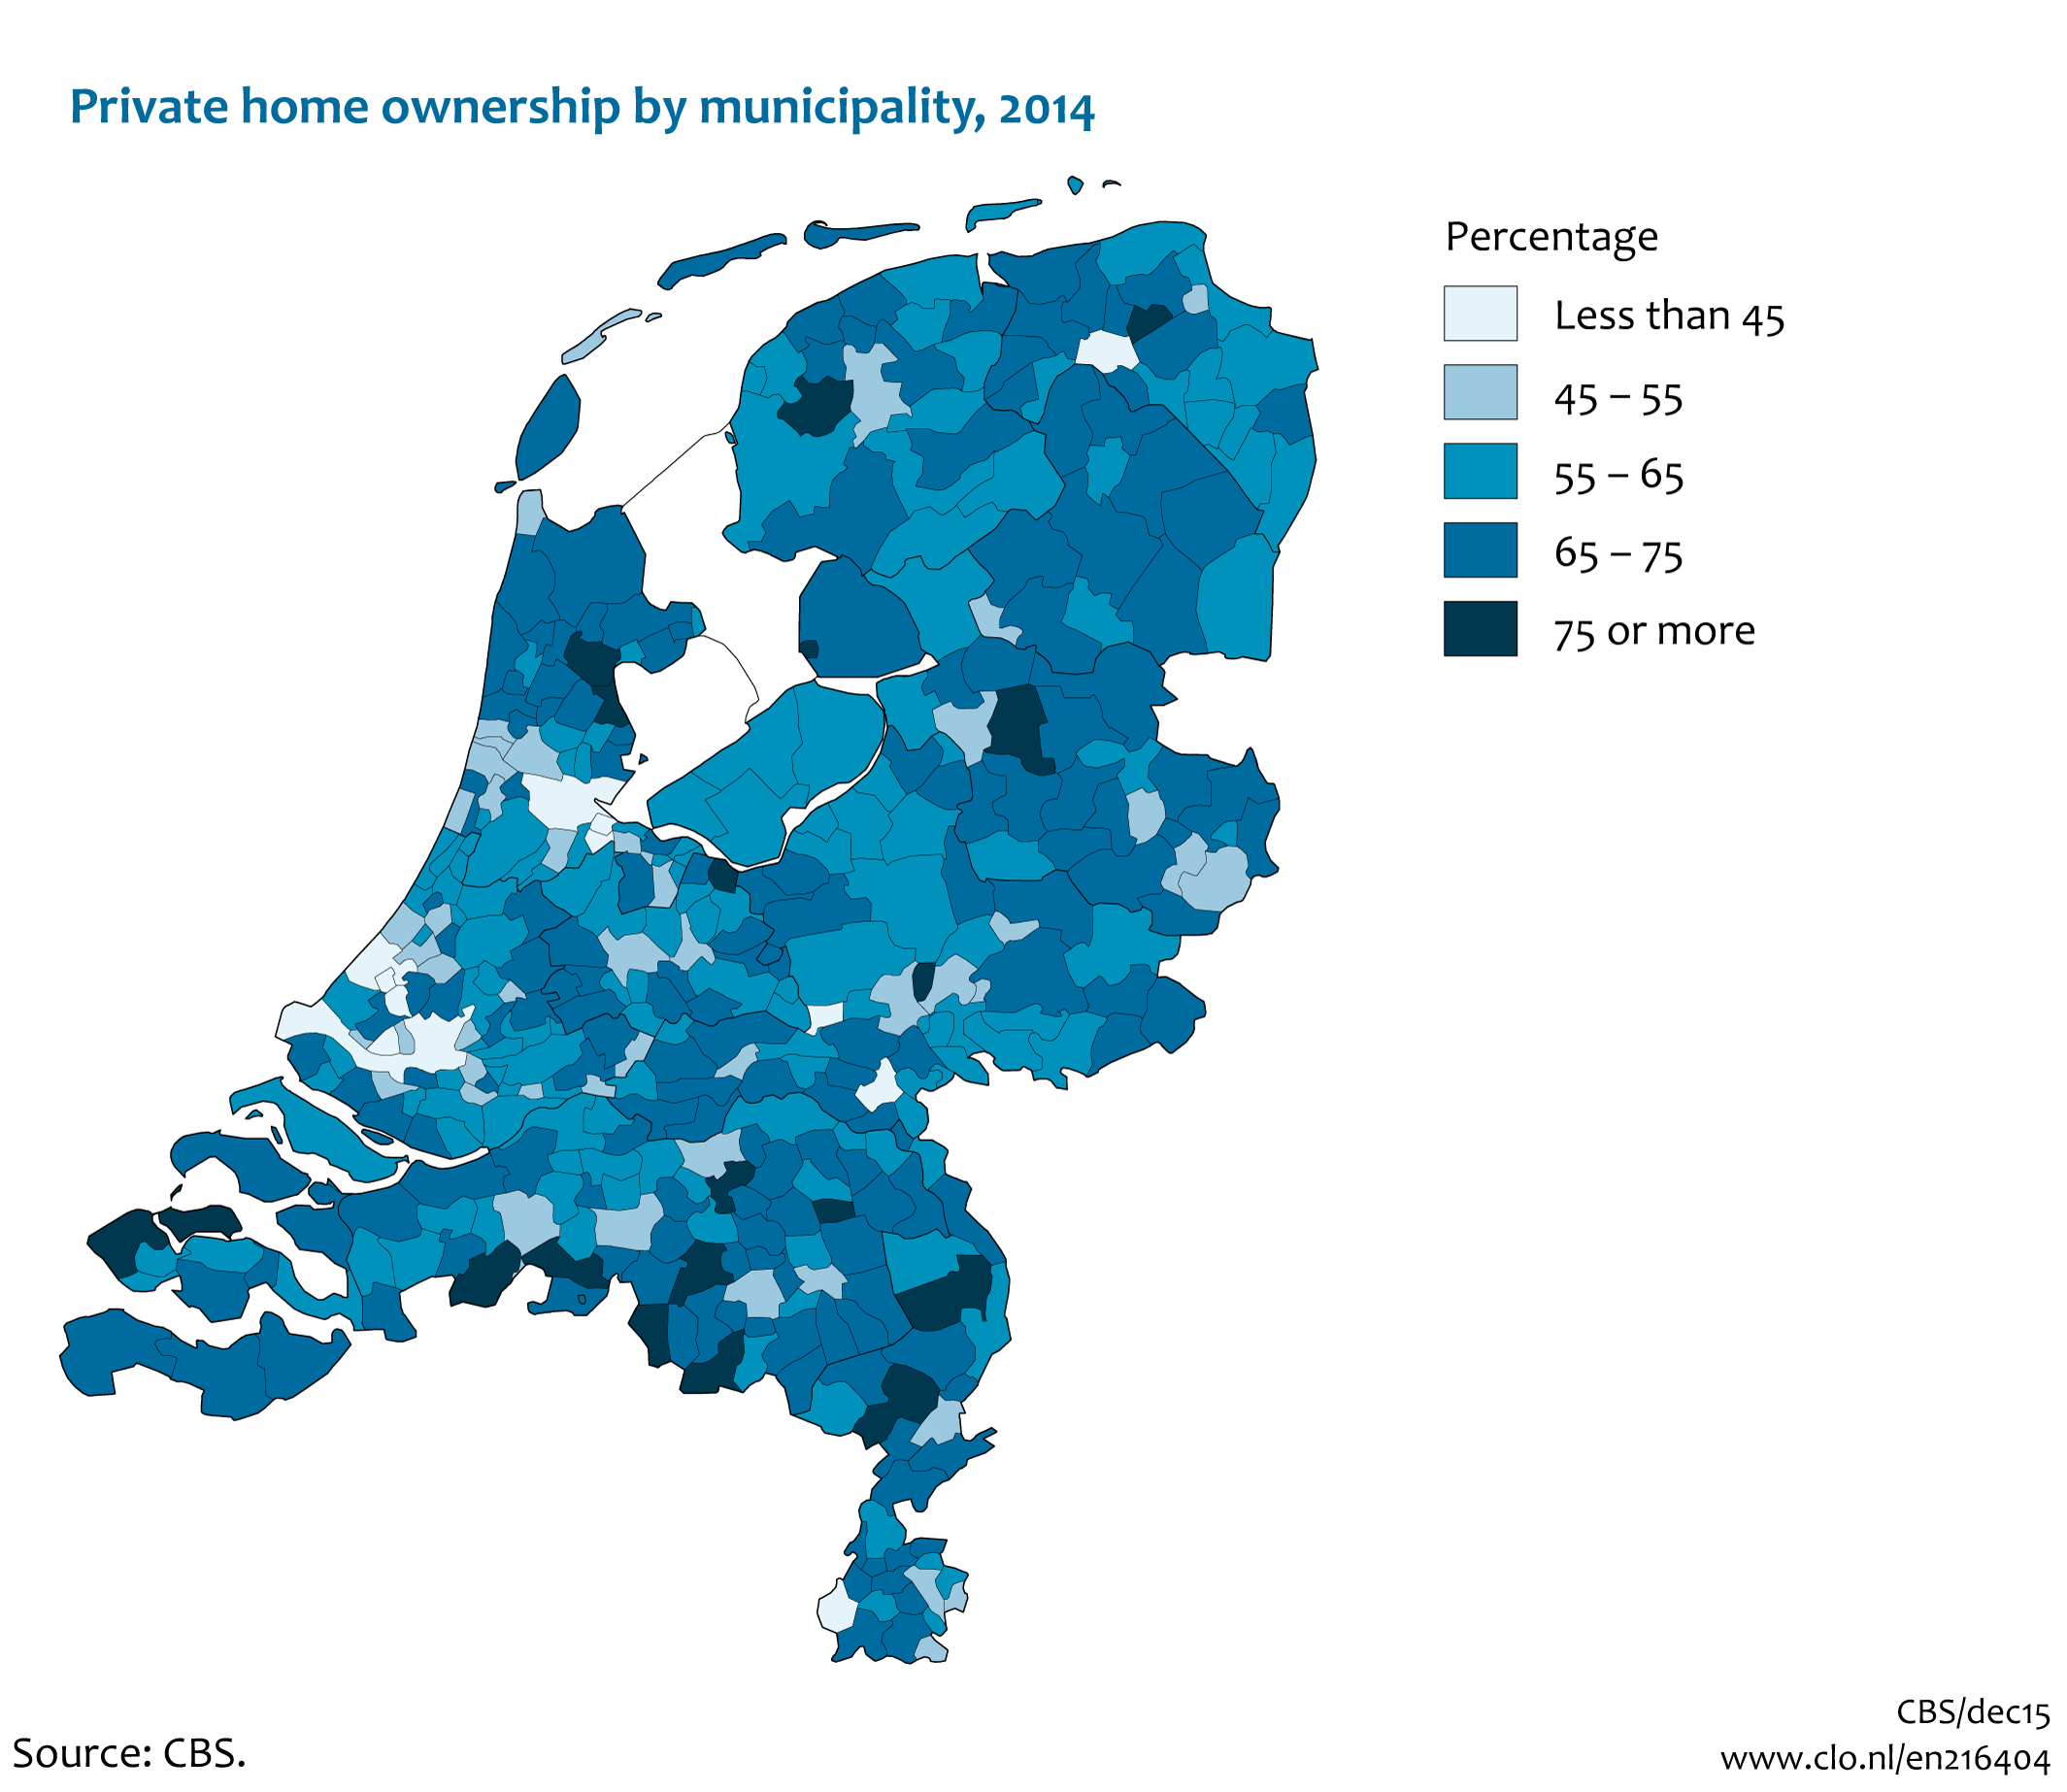 Image Private home ownership by municipality, 2014. The image is further explained in the text.